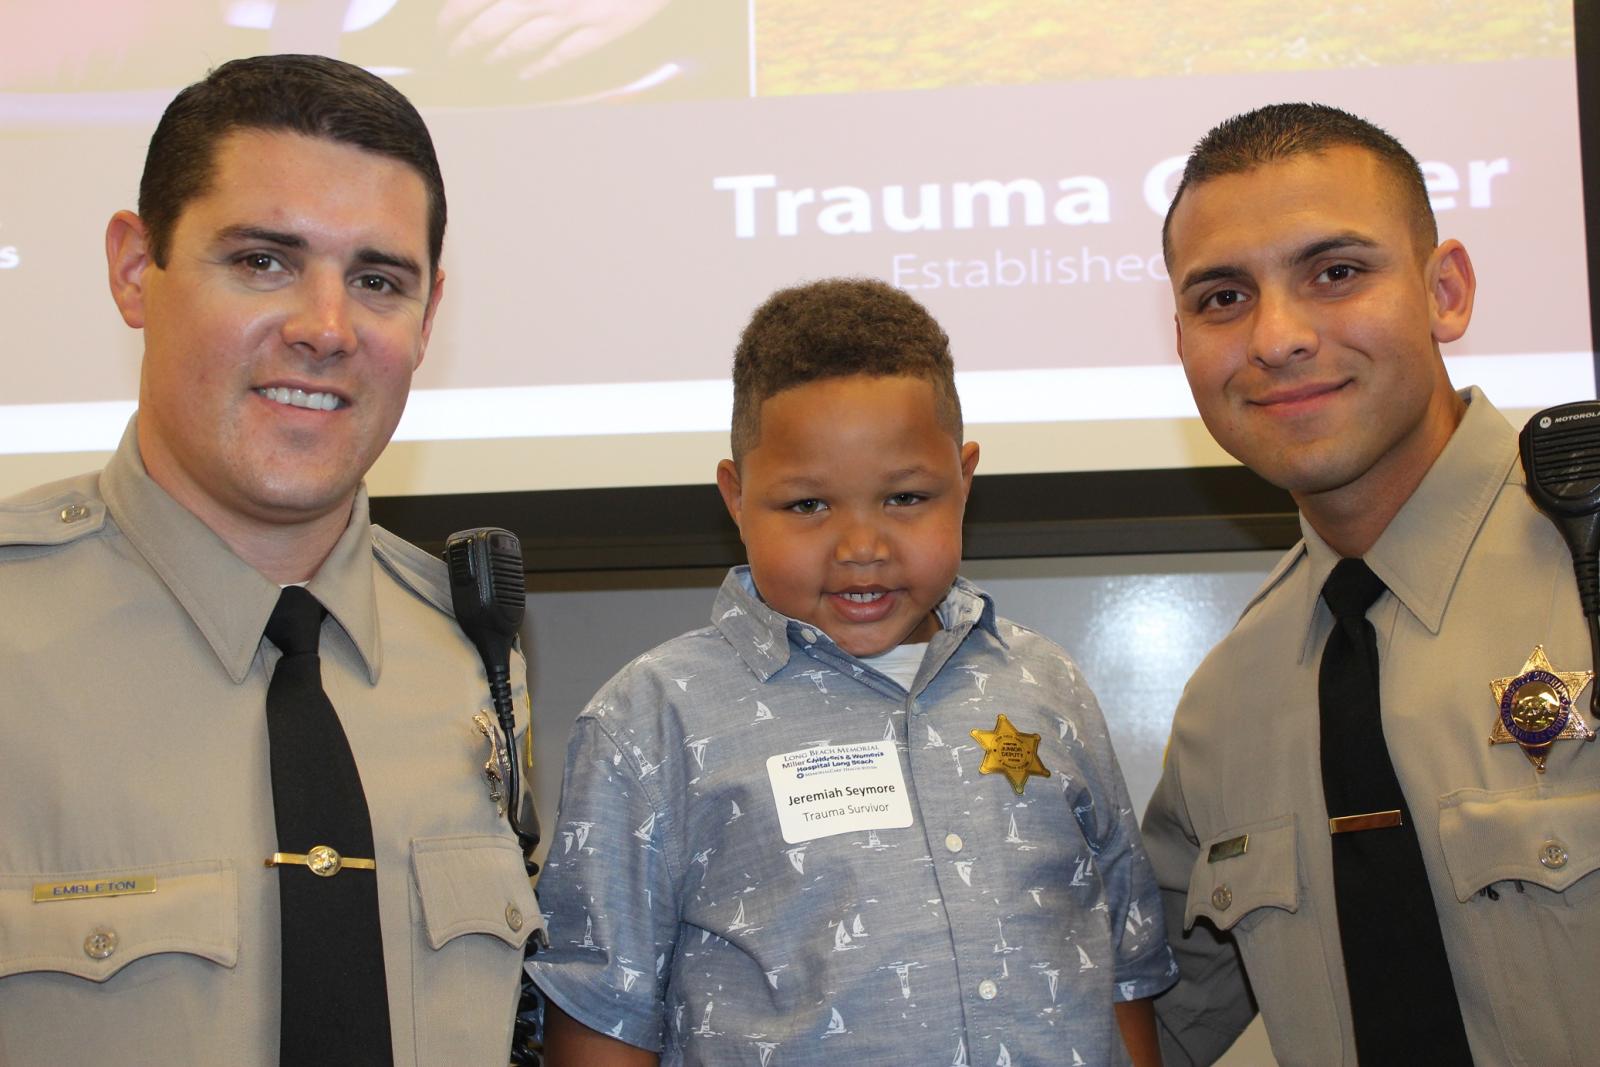 Image from Trauma Survivors Day reunion and of Jeremiah Seymour and the two LA County Sheriff deputies that helped him after he was mauled by a dog. 